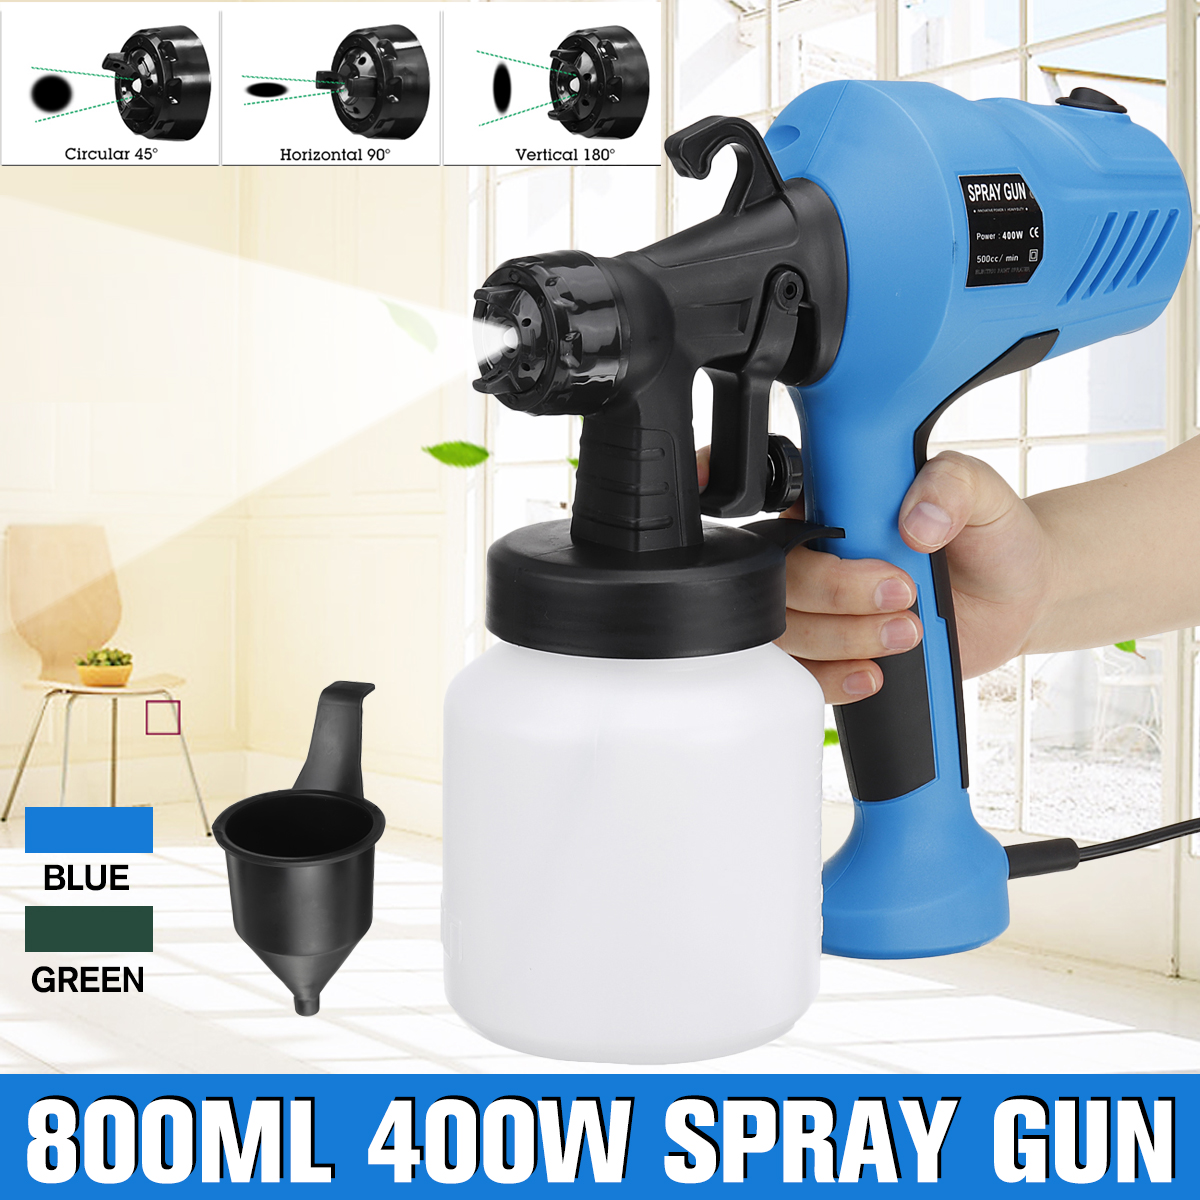 800ml-220V-400W-High-Power-Electric-Machine-Paint-Sprayer-Painting-Fogger-Sprayer-Tool-For-Indoor-An-1716537-2